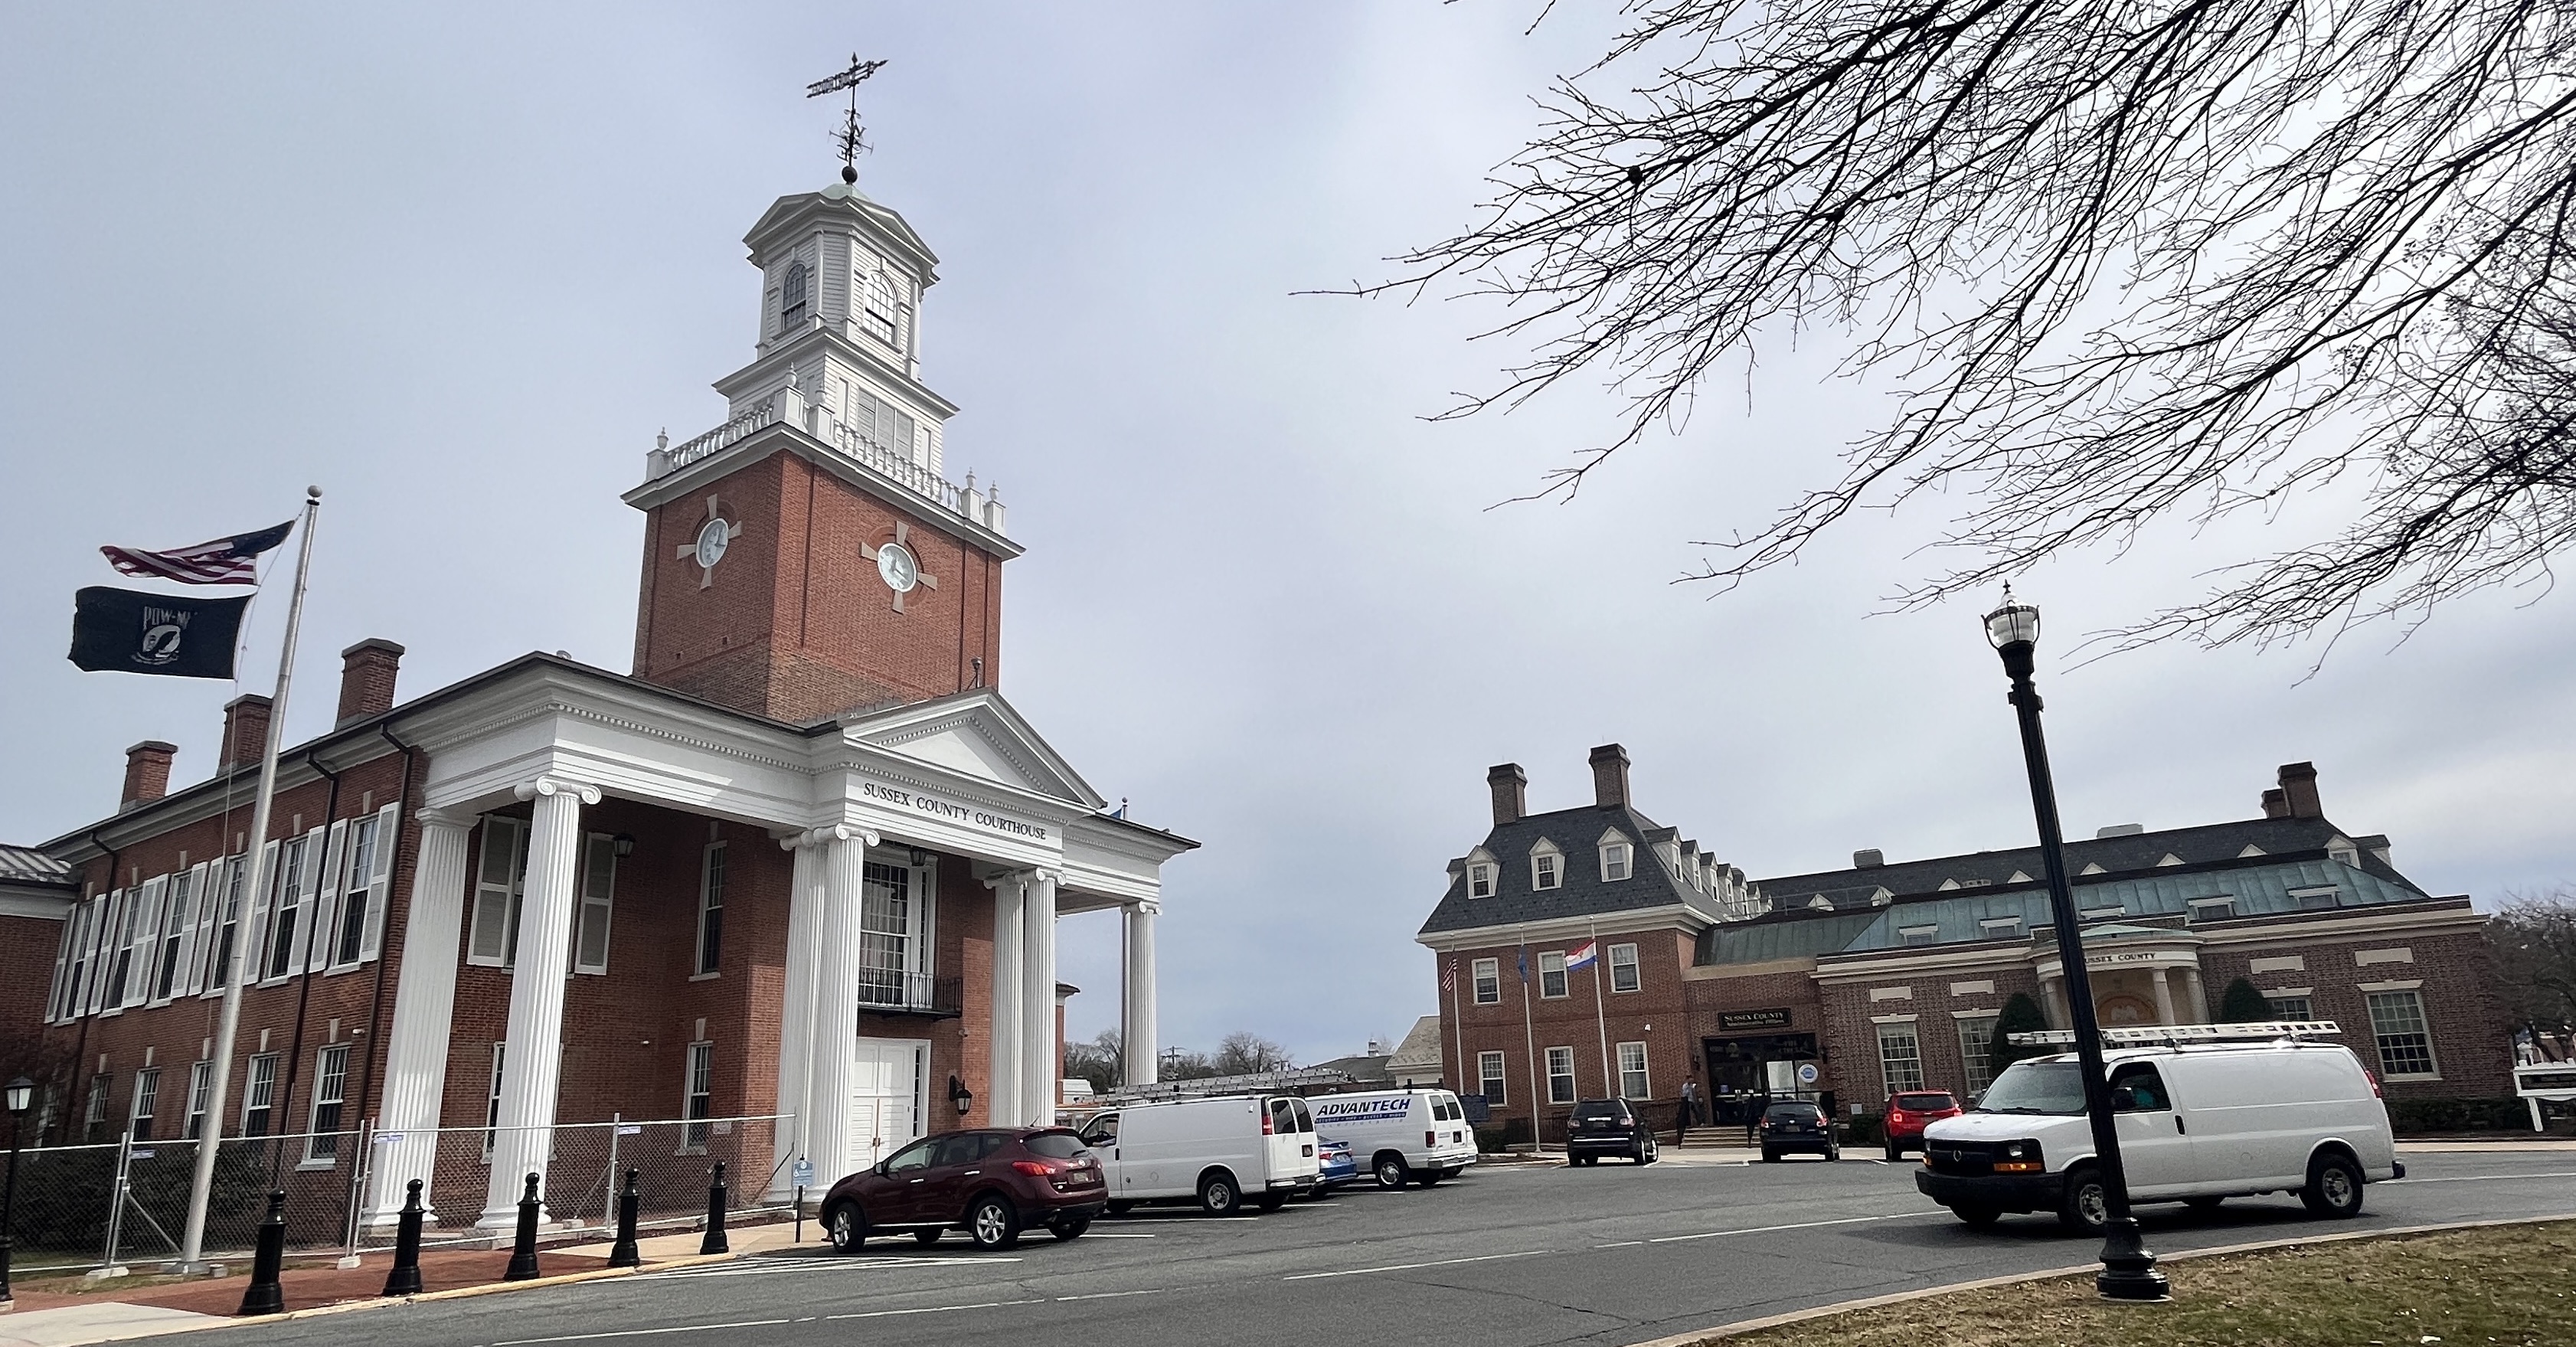 Sussex County Courthouse and The Circle